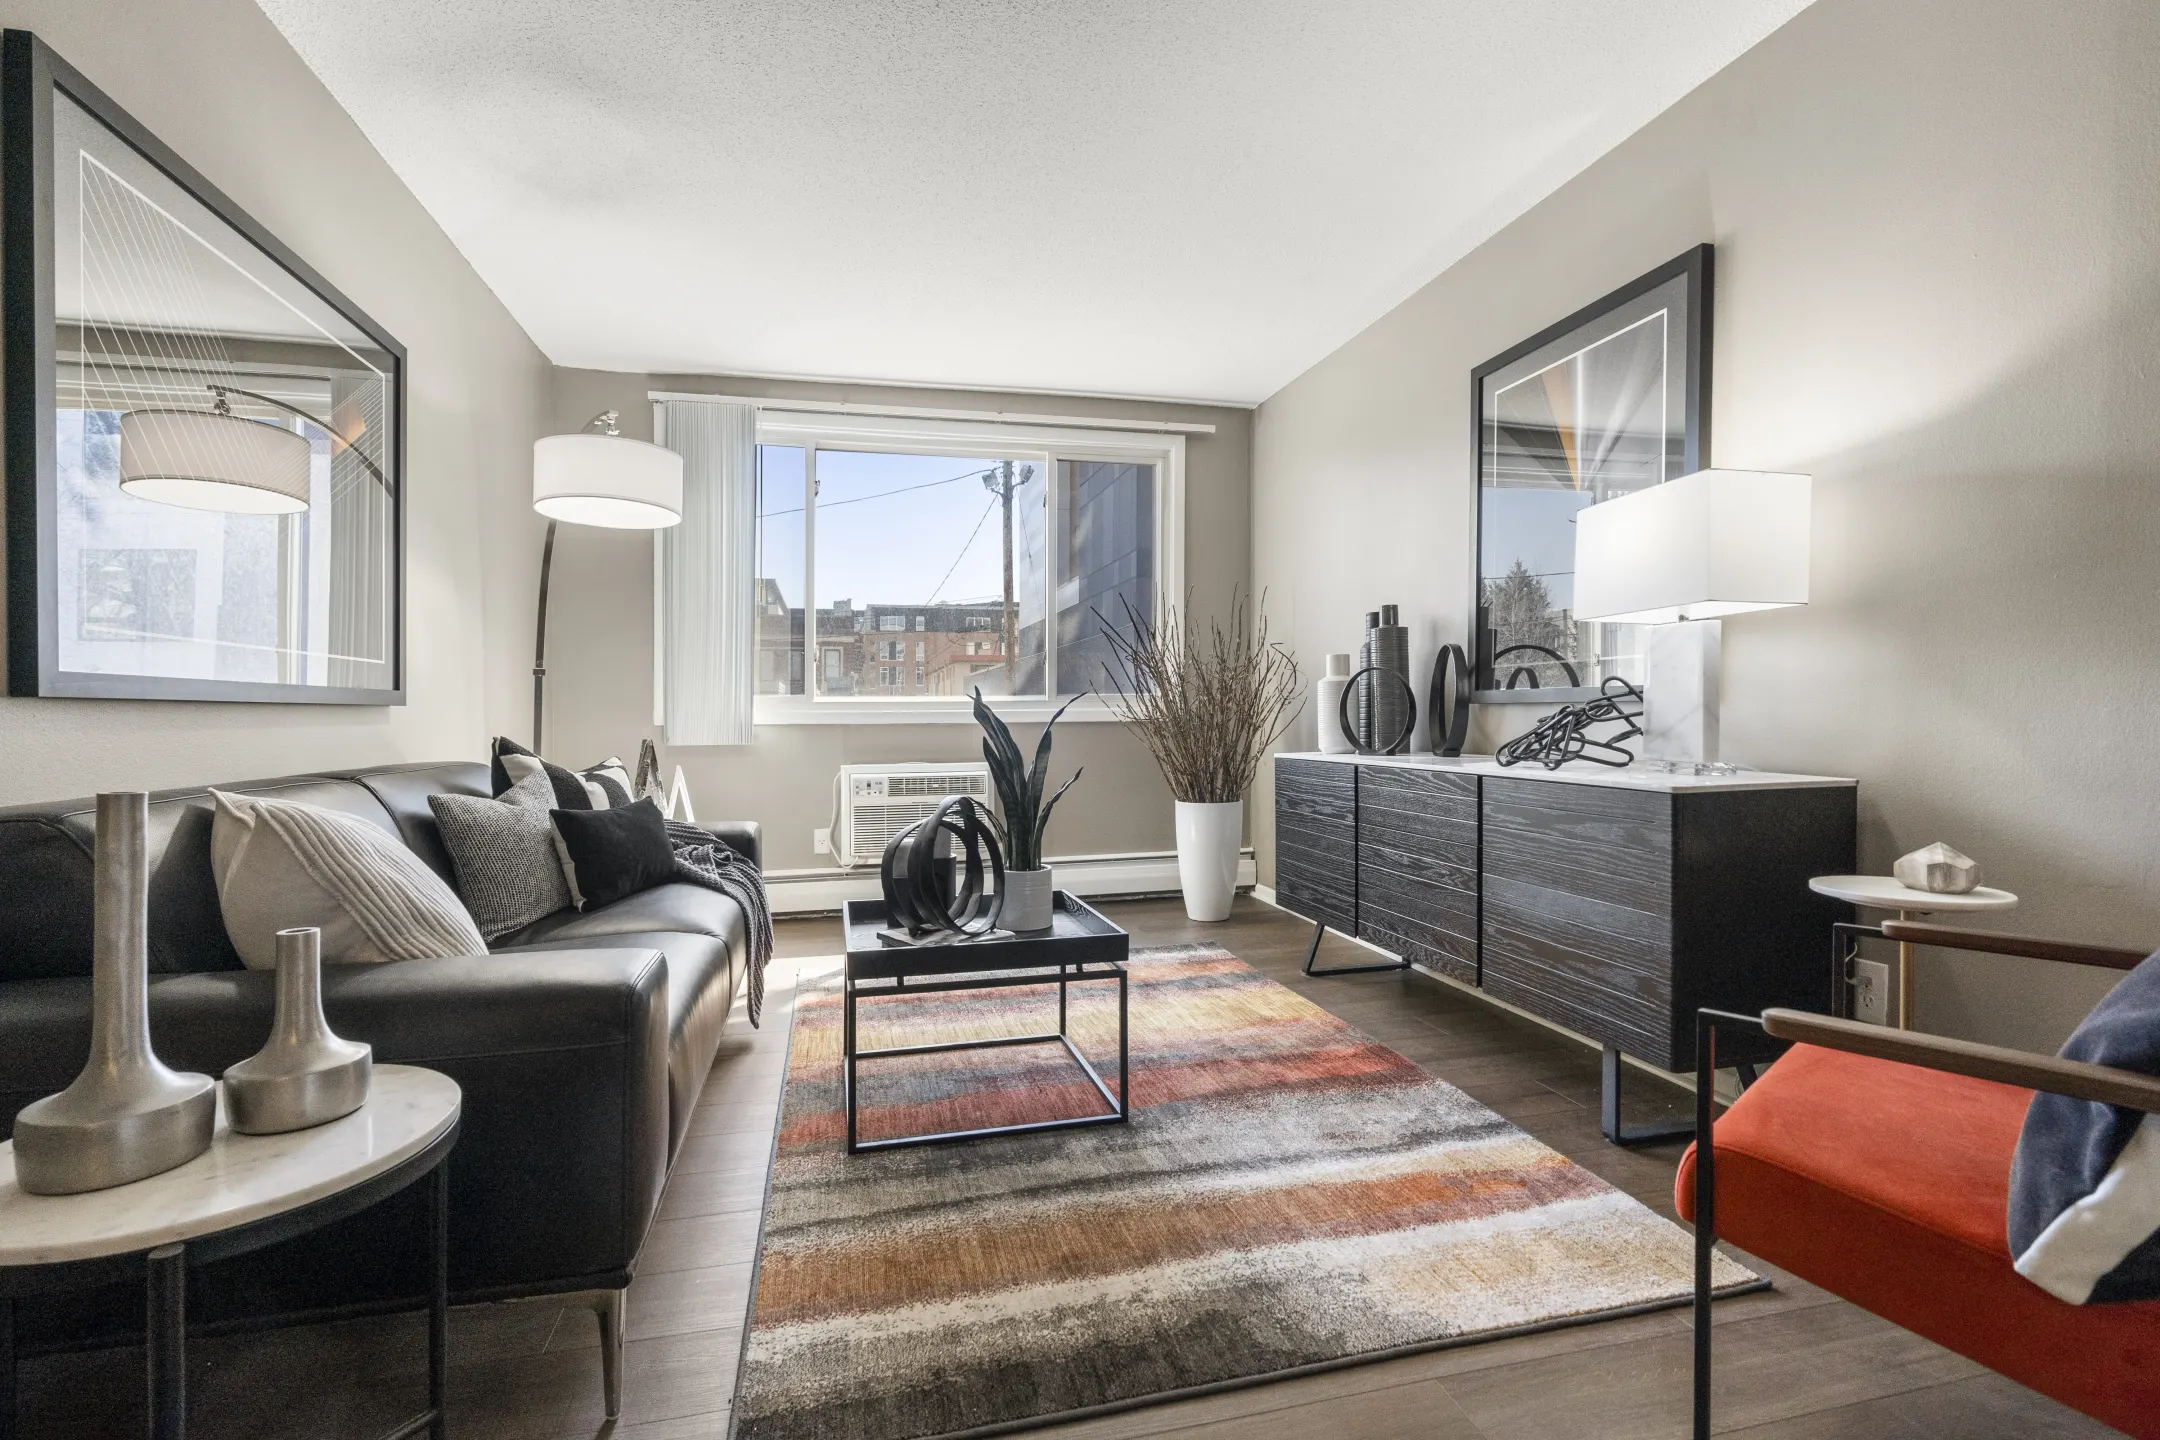 Living Room - Uptown Square - Minneapolis, MN